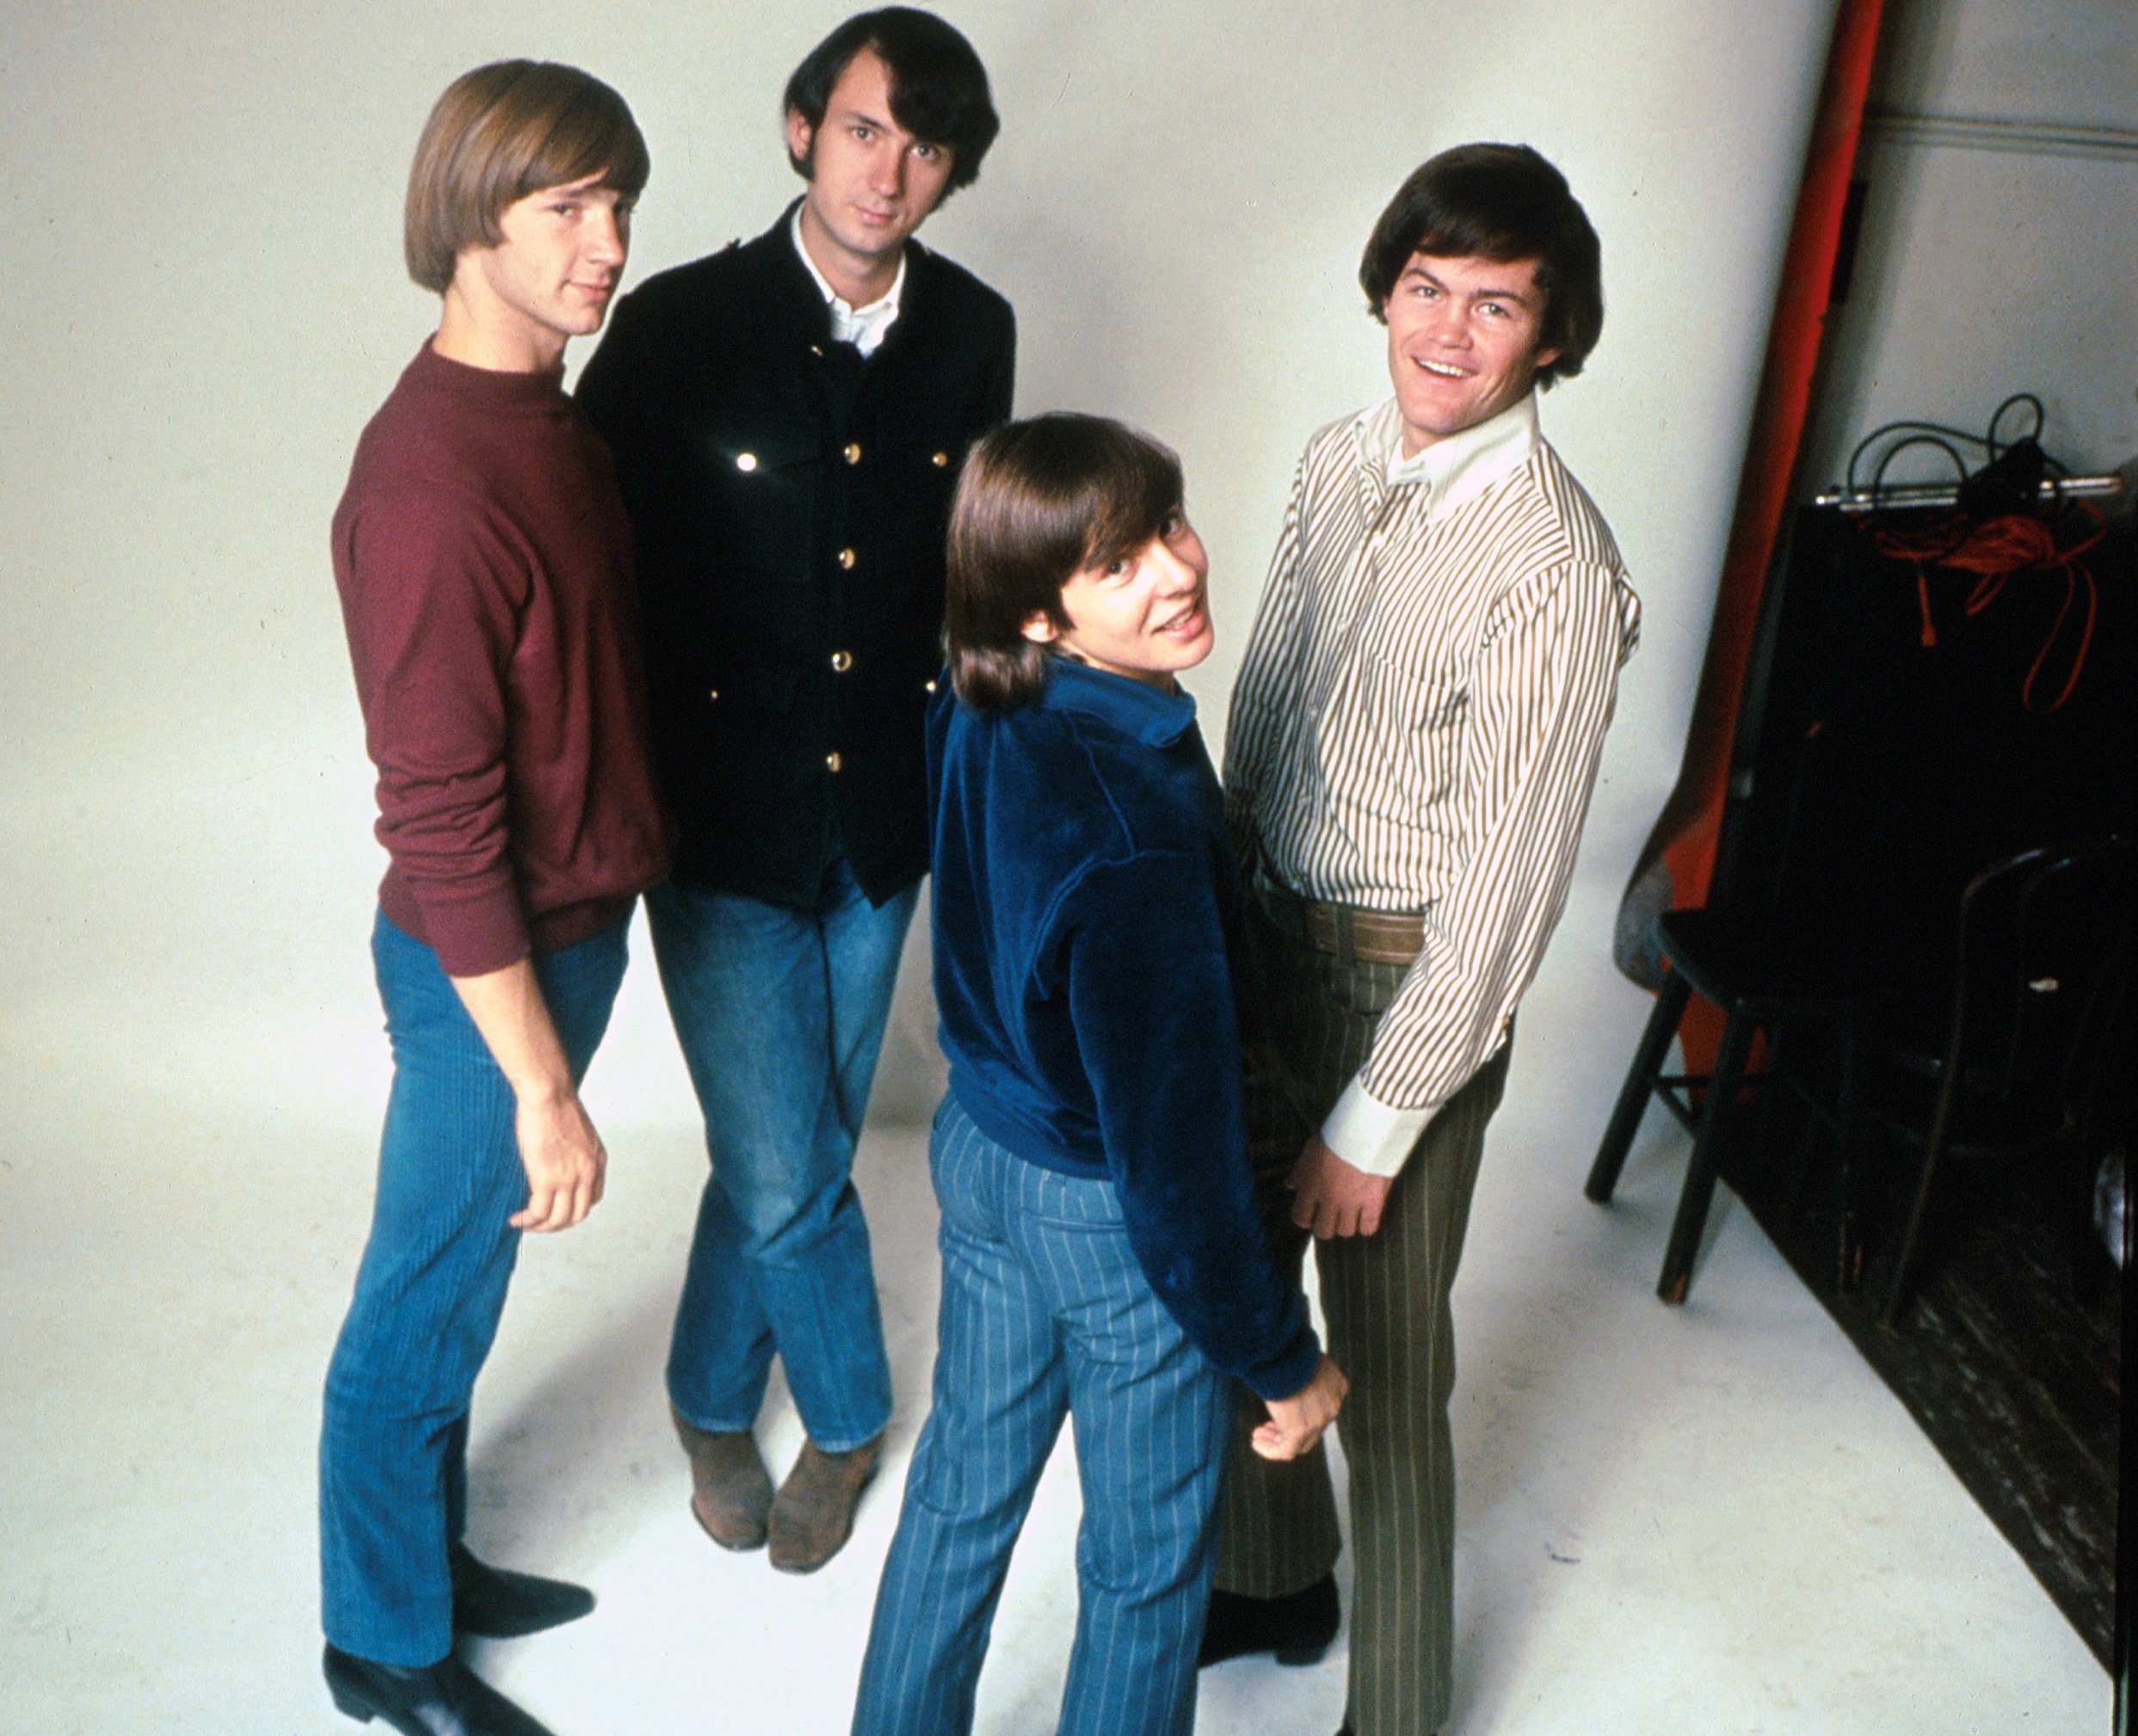 The Monkees' Peter Tork, Mike Nesmith, Davy Jones, and Micky Dolenz with a white background